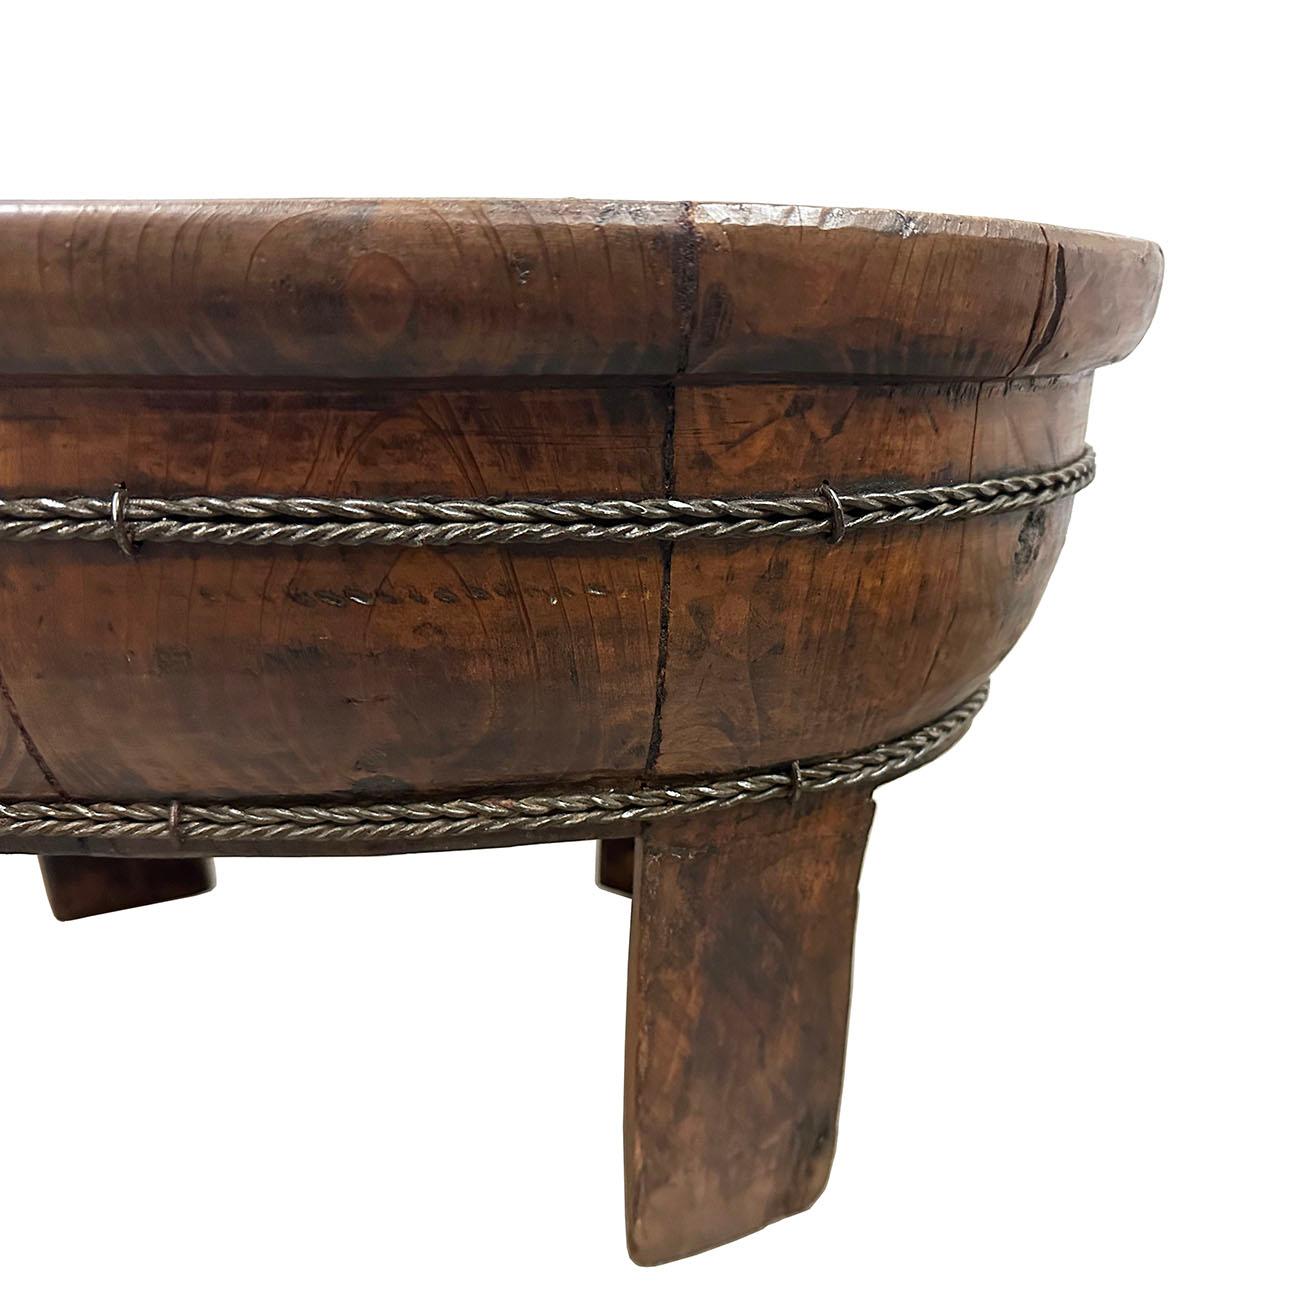 Hand-Carved Early 20th Century Chinese Hand Made Wooden Wash/Laundry Basin